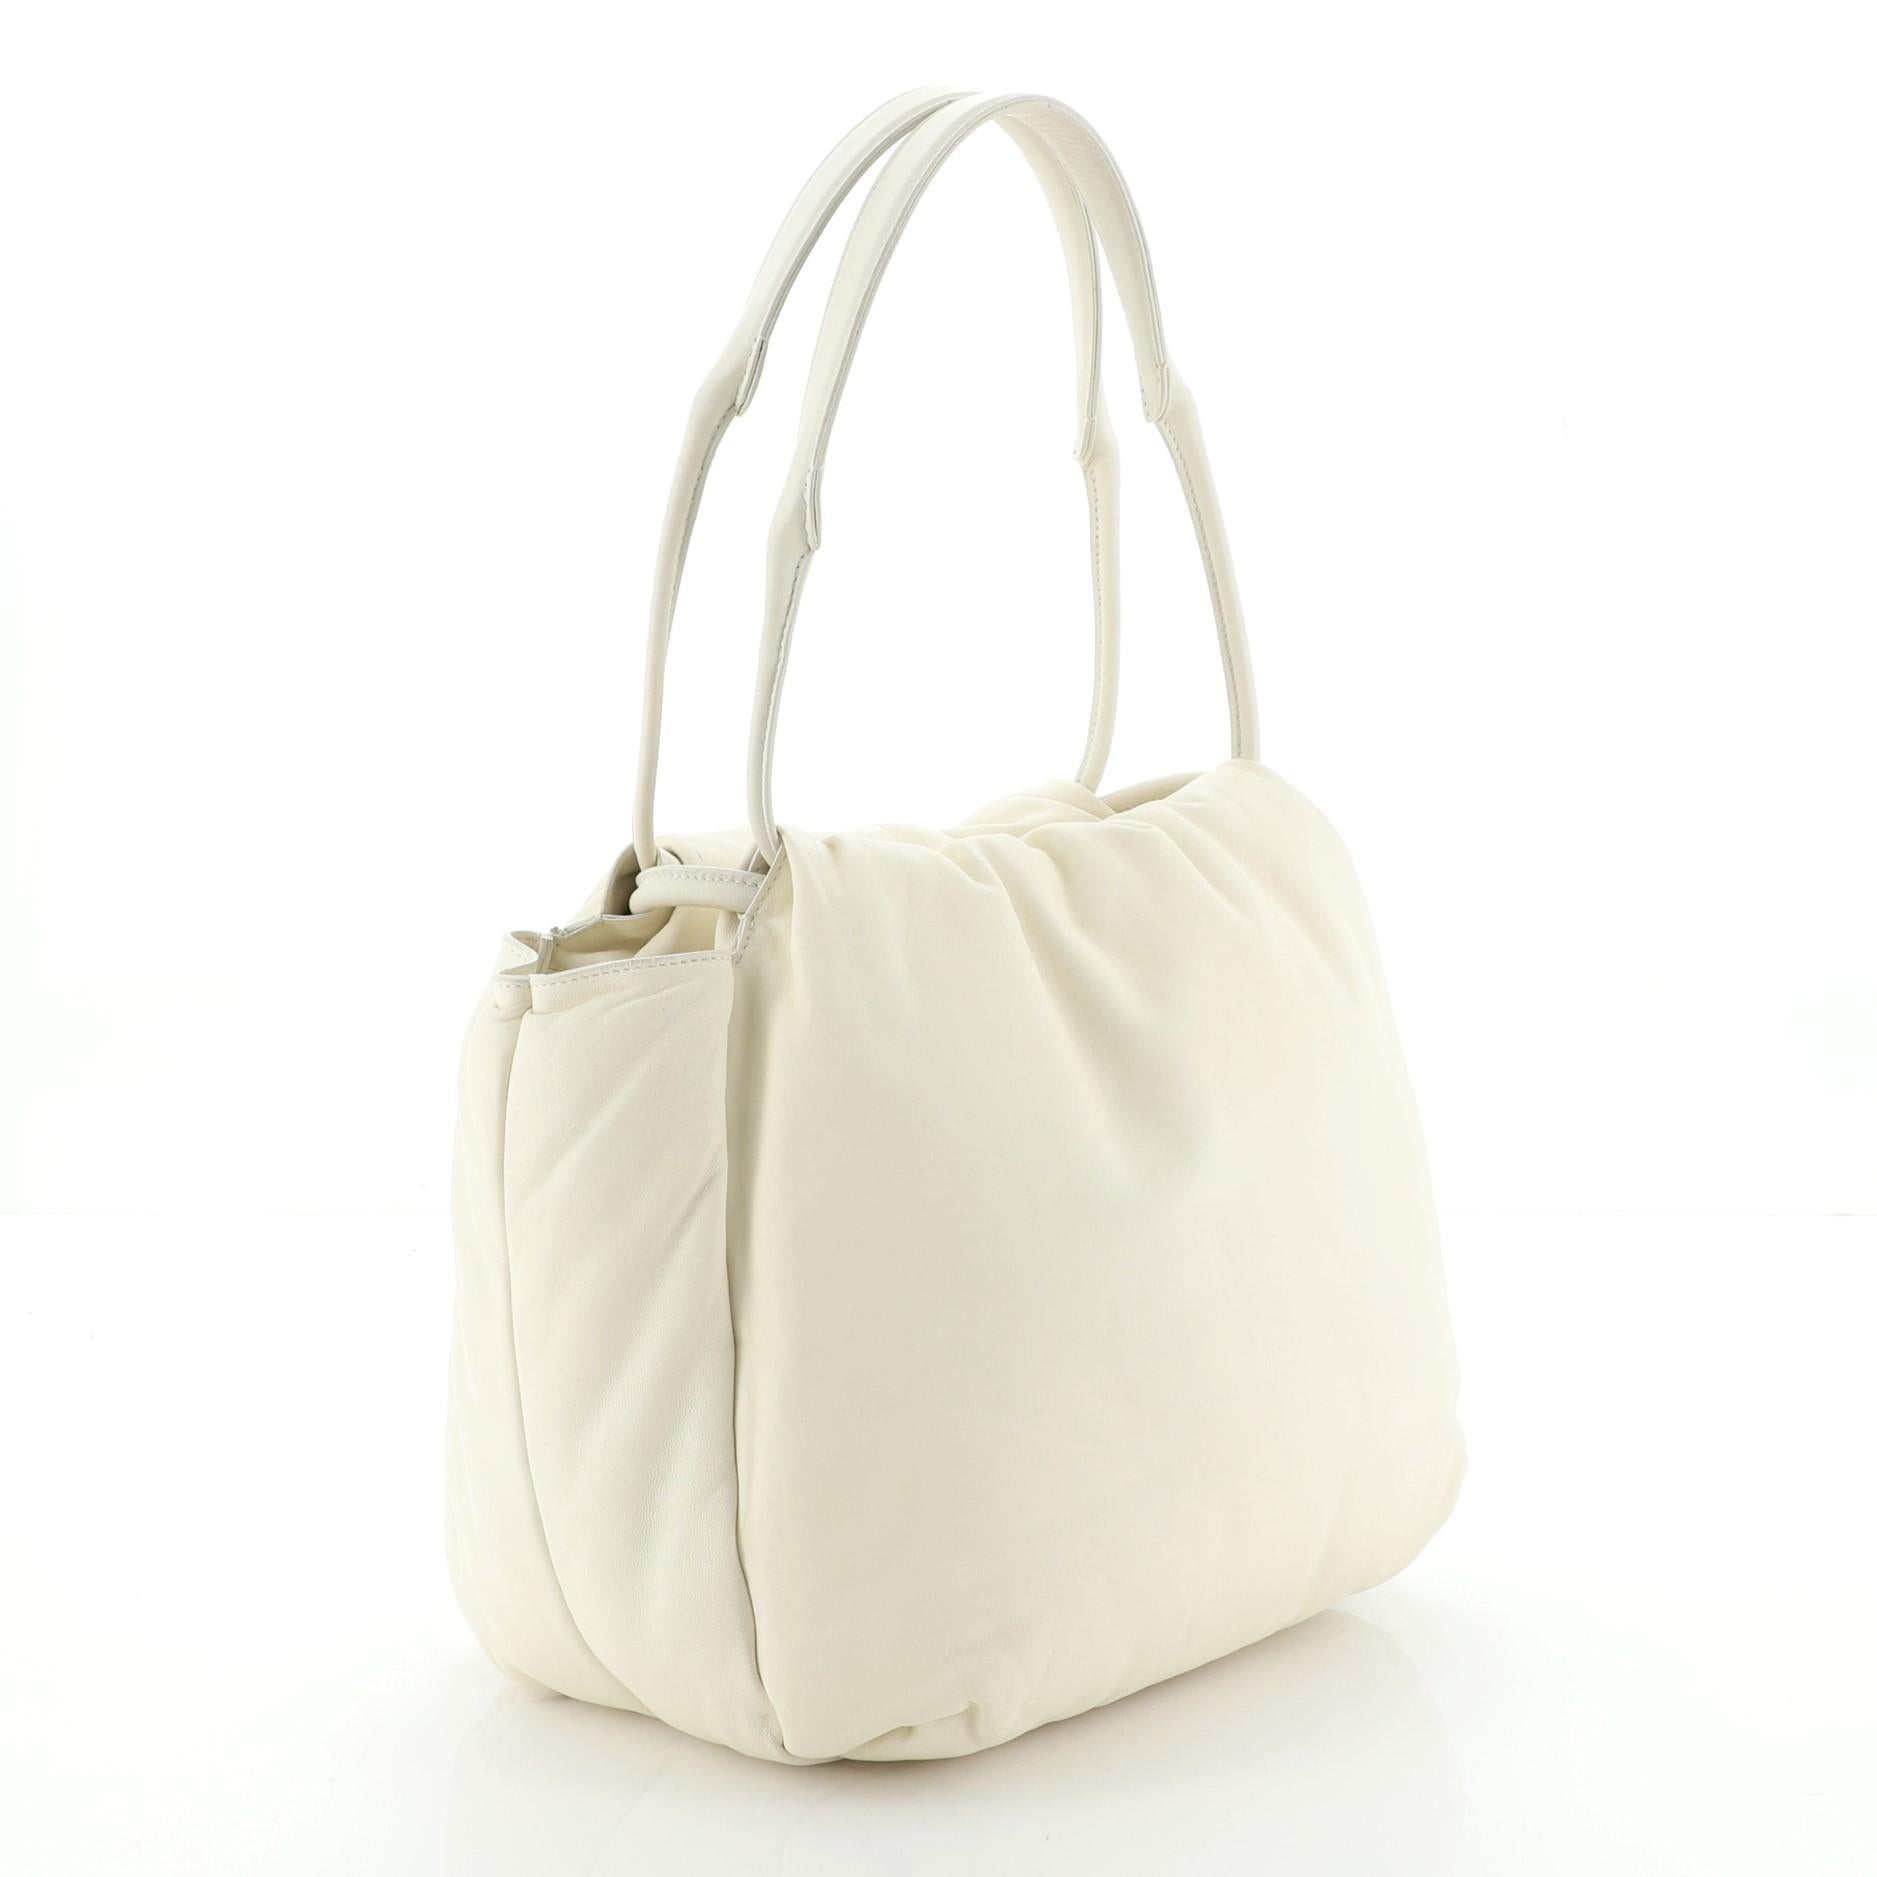 This Celine Pillow Bucket Bag Leather, crafted from neutral leather, features a leather top handle. Its drawstring closure opens to a neutral leather interior with side slip pockets. 

Estimated Retail Price: $2,800
Condition: Very good. Light